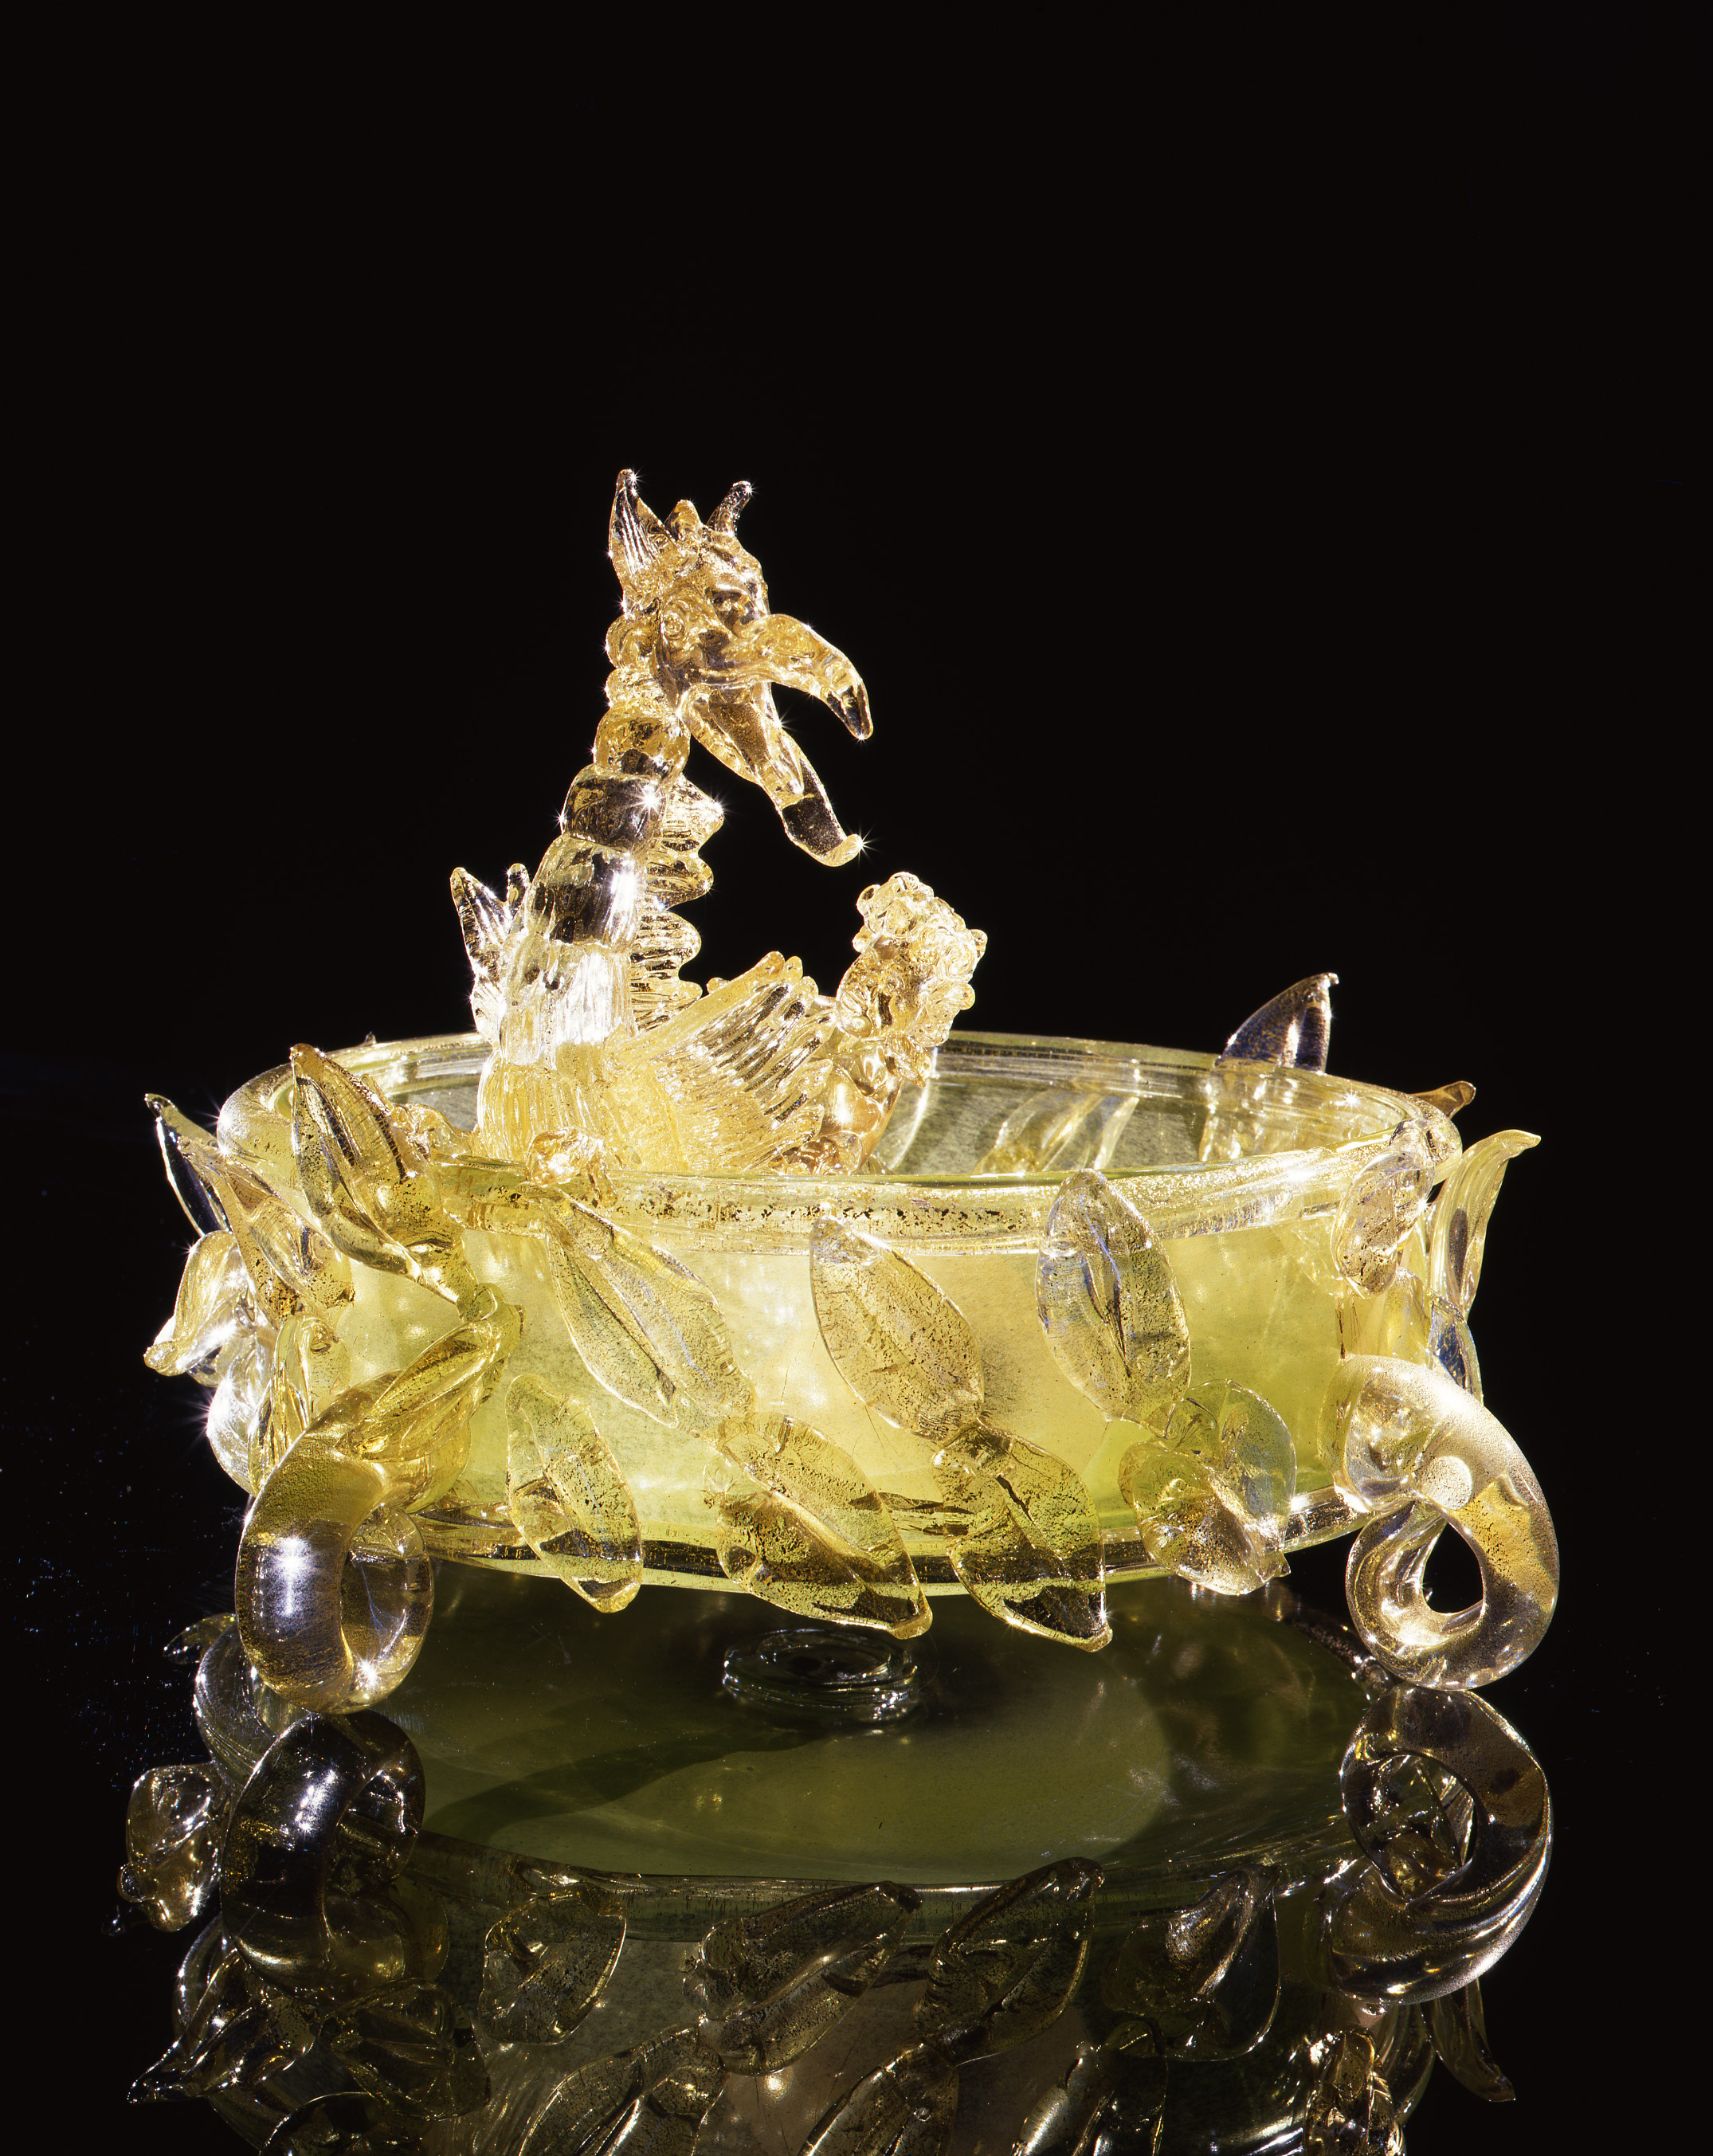  Dale Chihuly,&nbsp; Gold over Fountain Green Putti Venetian with Leaves and Dragon&nbsp; (1994, glass, 13 x 18 x 18 inches) 